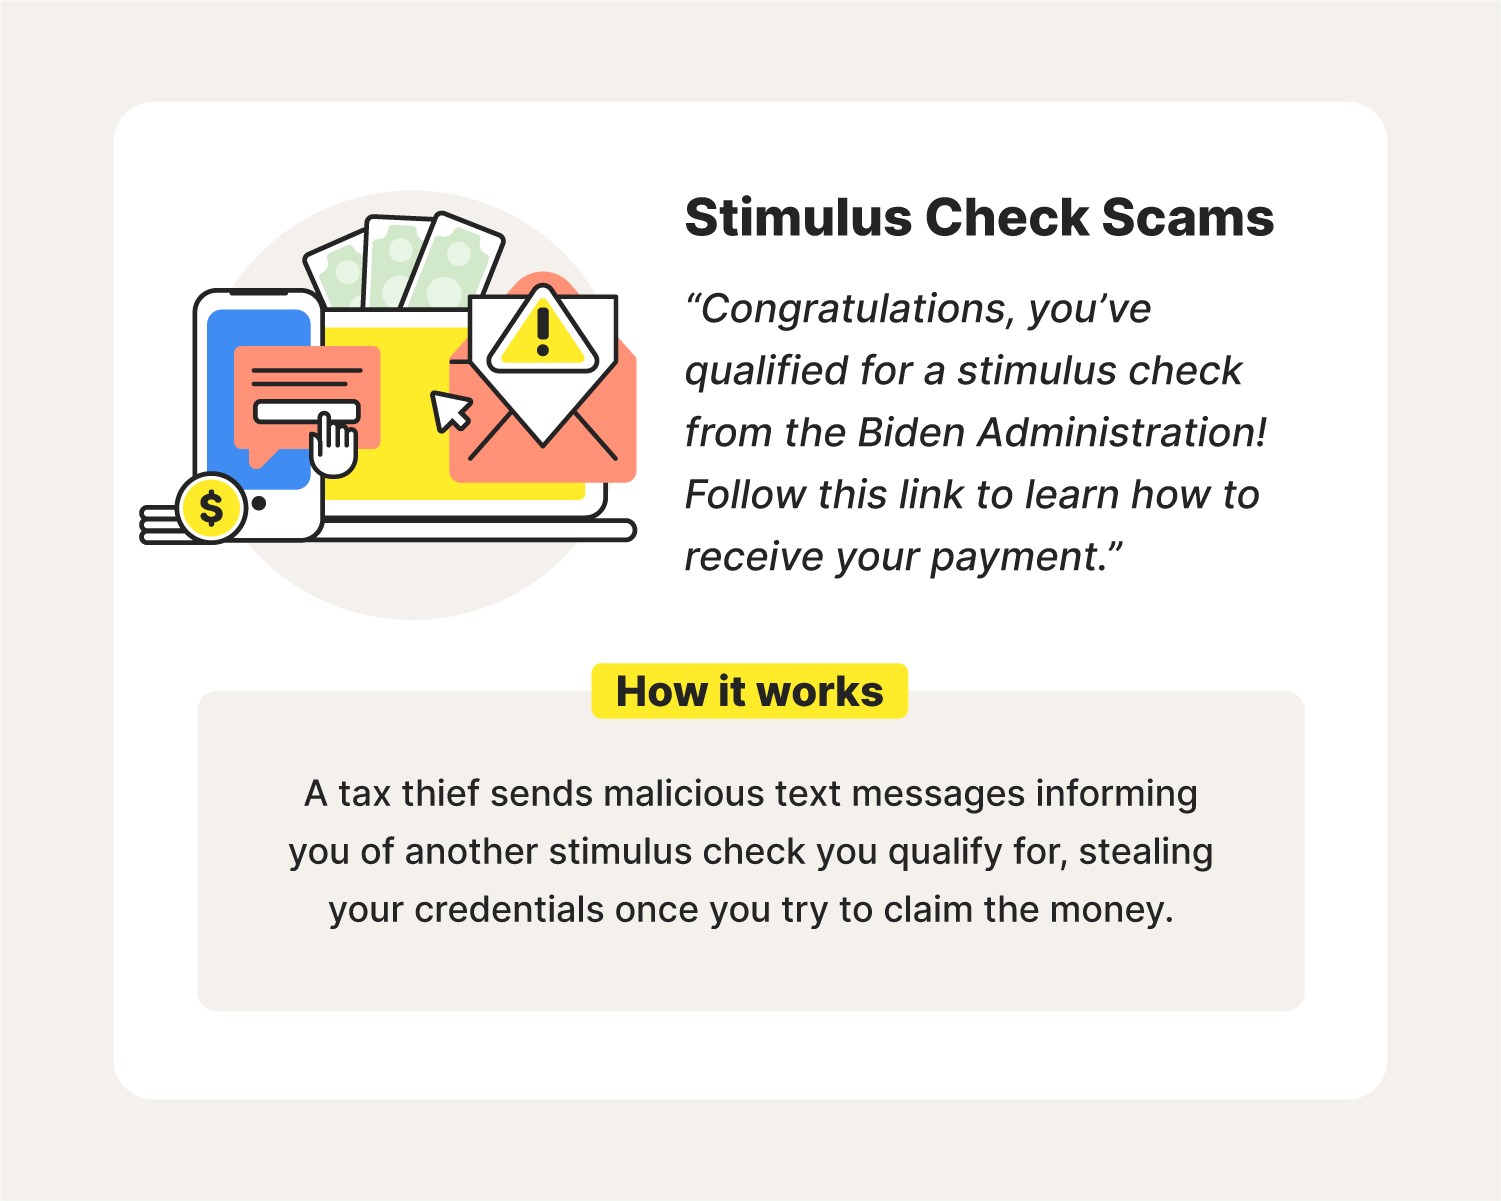 An illustration accompanies an explanation of how a stimulus check scam works in order to show the true dangers of IRS scams.